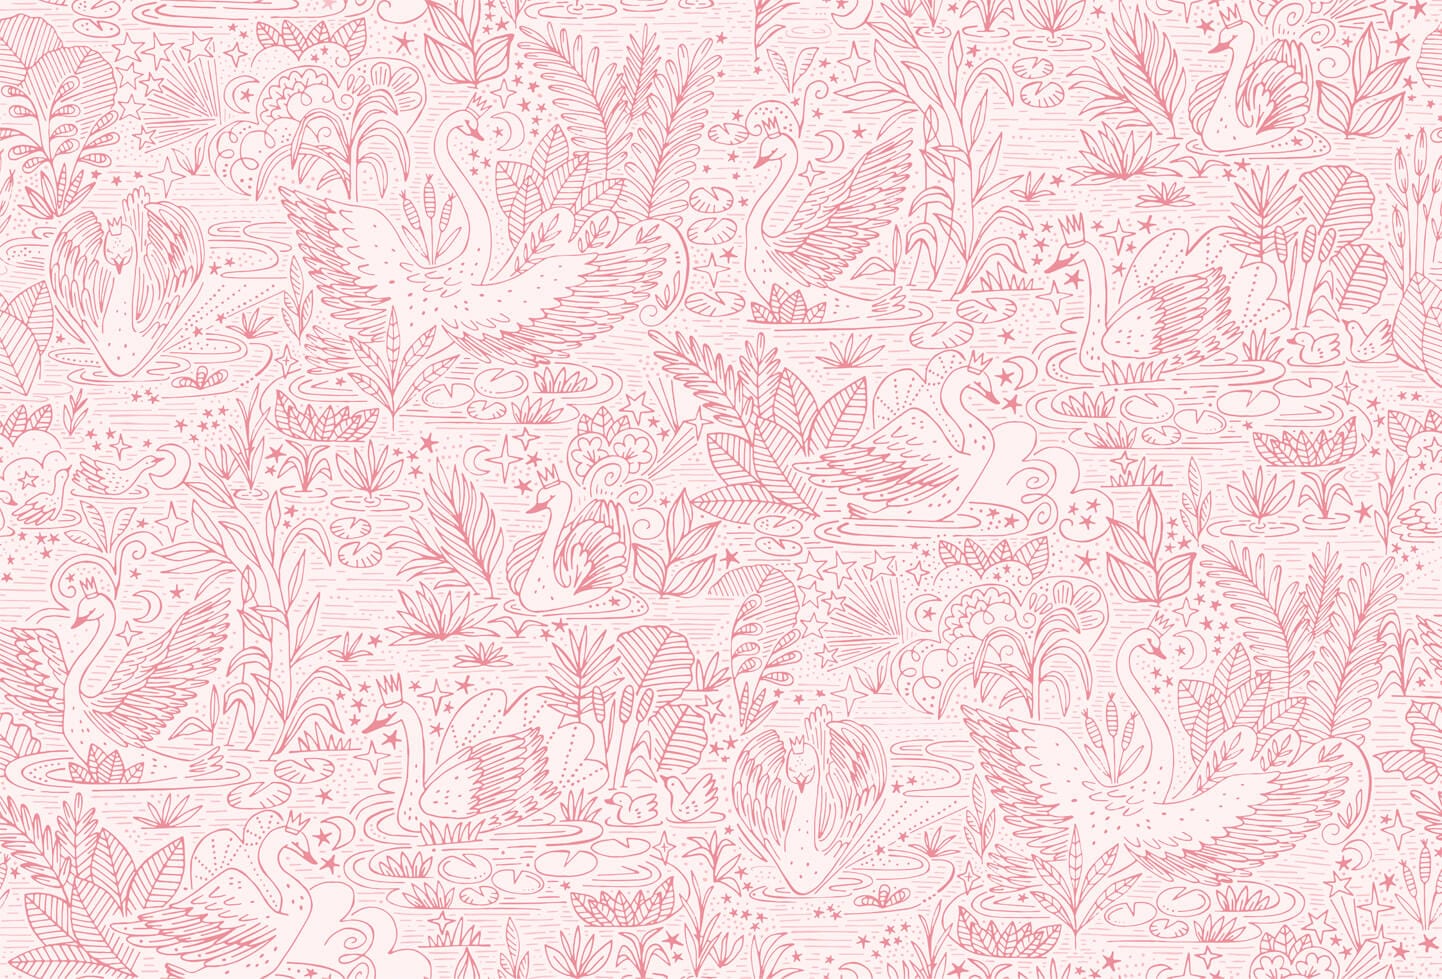 Wallpaper of very detailed floral print with swans gliding across a lake, flowers and leaves surround them. The print is line work and is all in pink